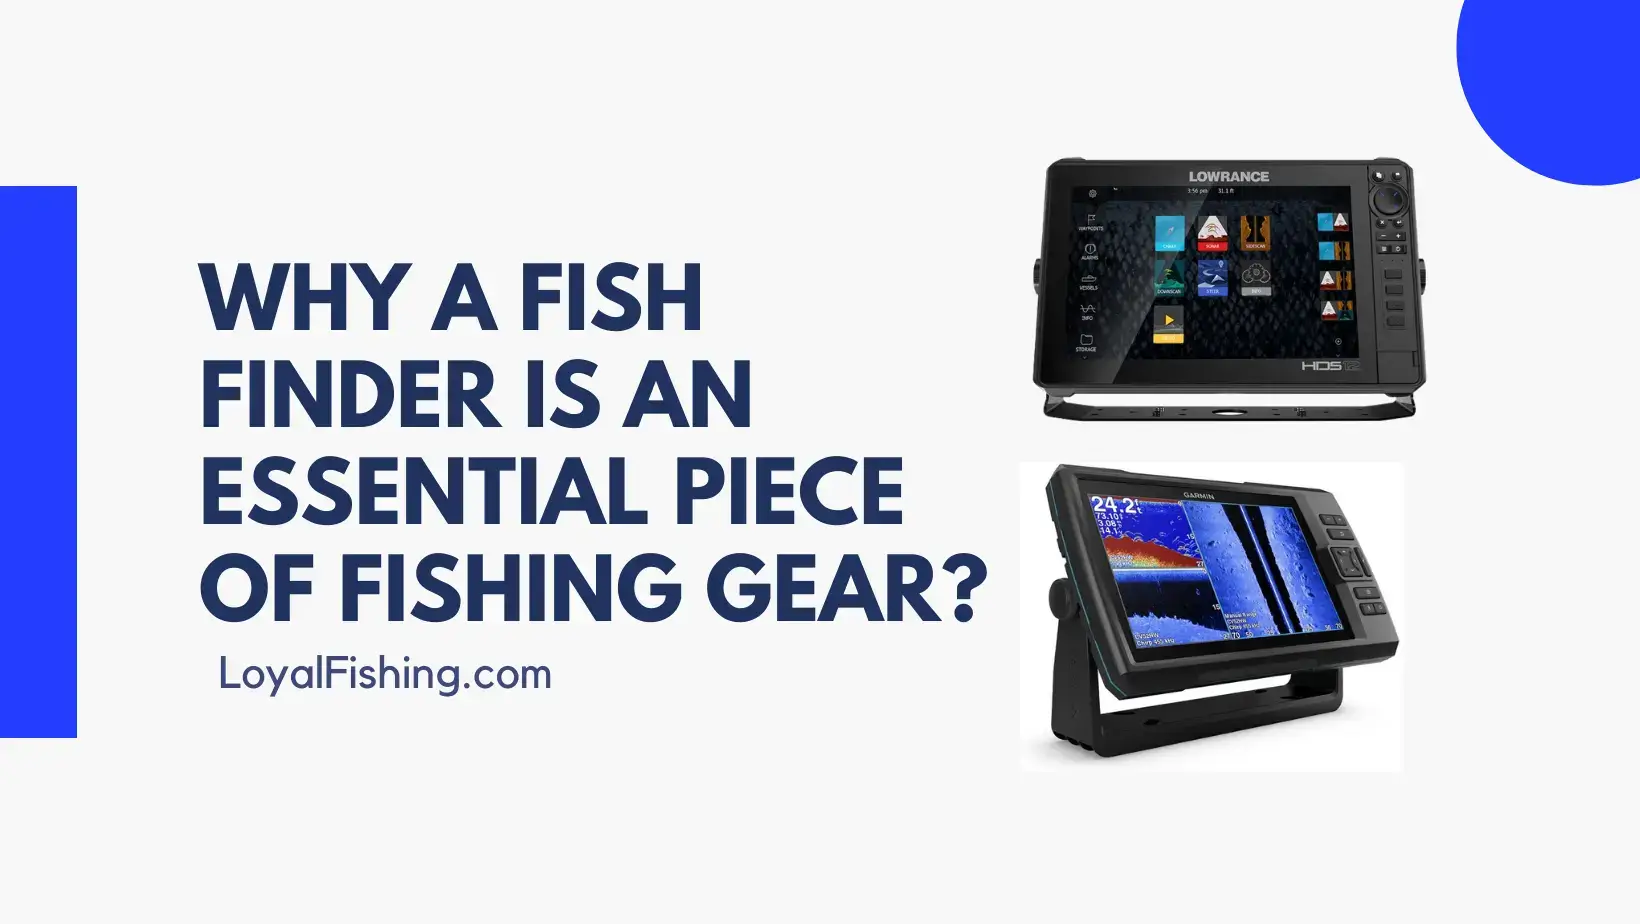 Why a Fish Finder is an Essential Piece of Fishing Gear